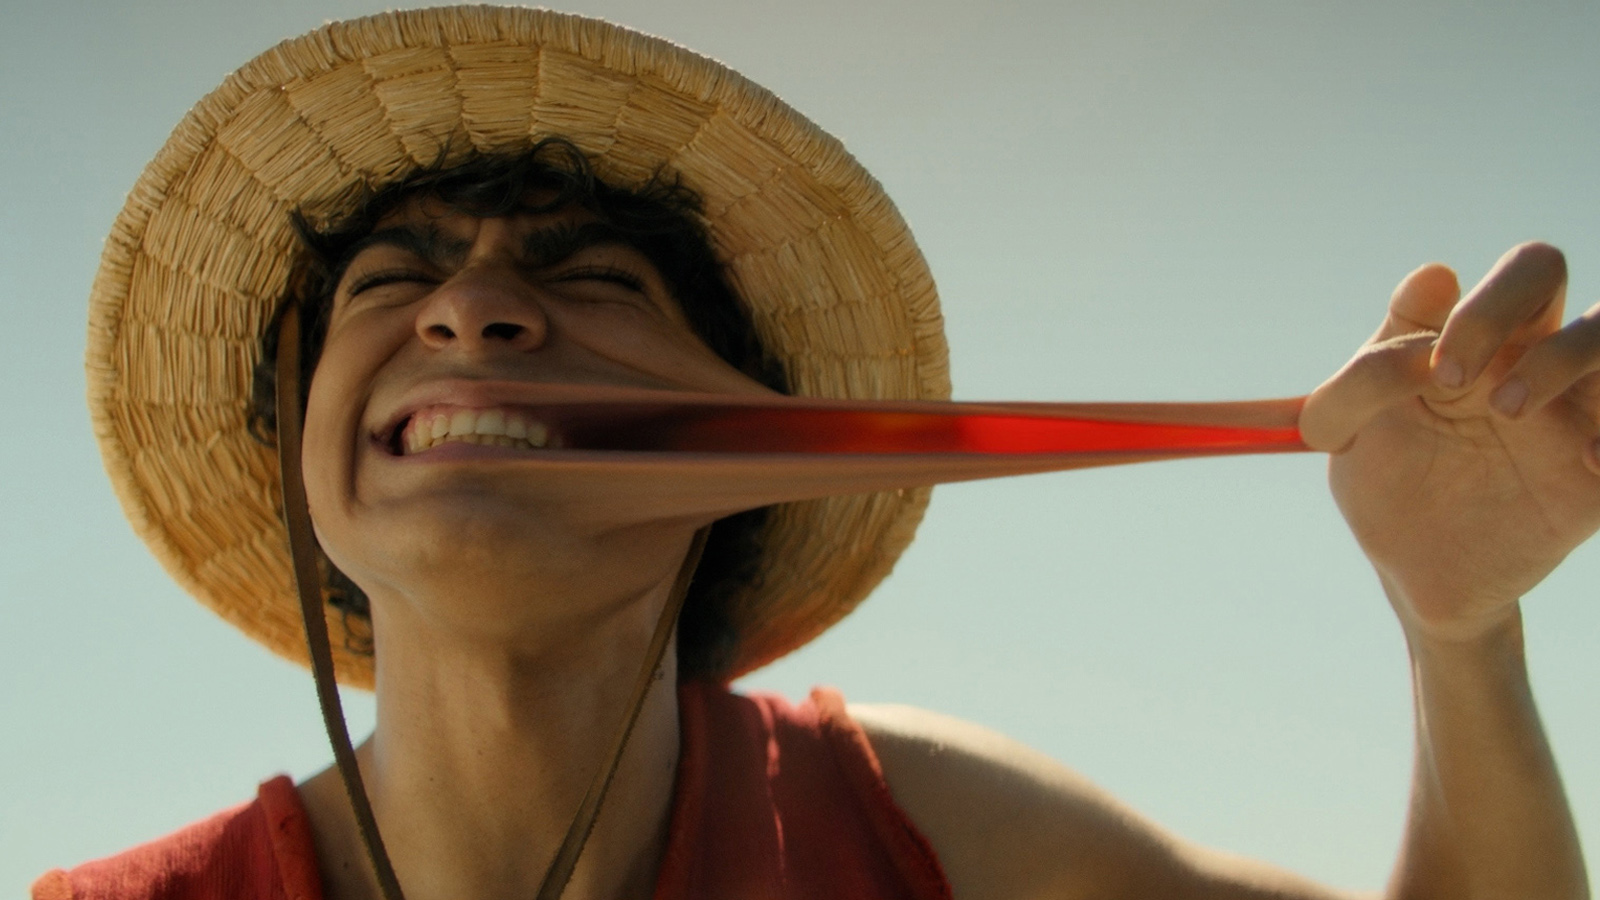 Check out Netflix's ONE PIECE LIVE ACTION TRAILER